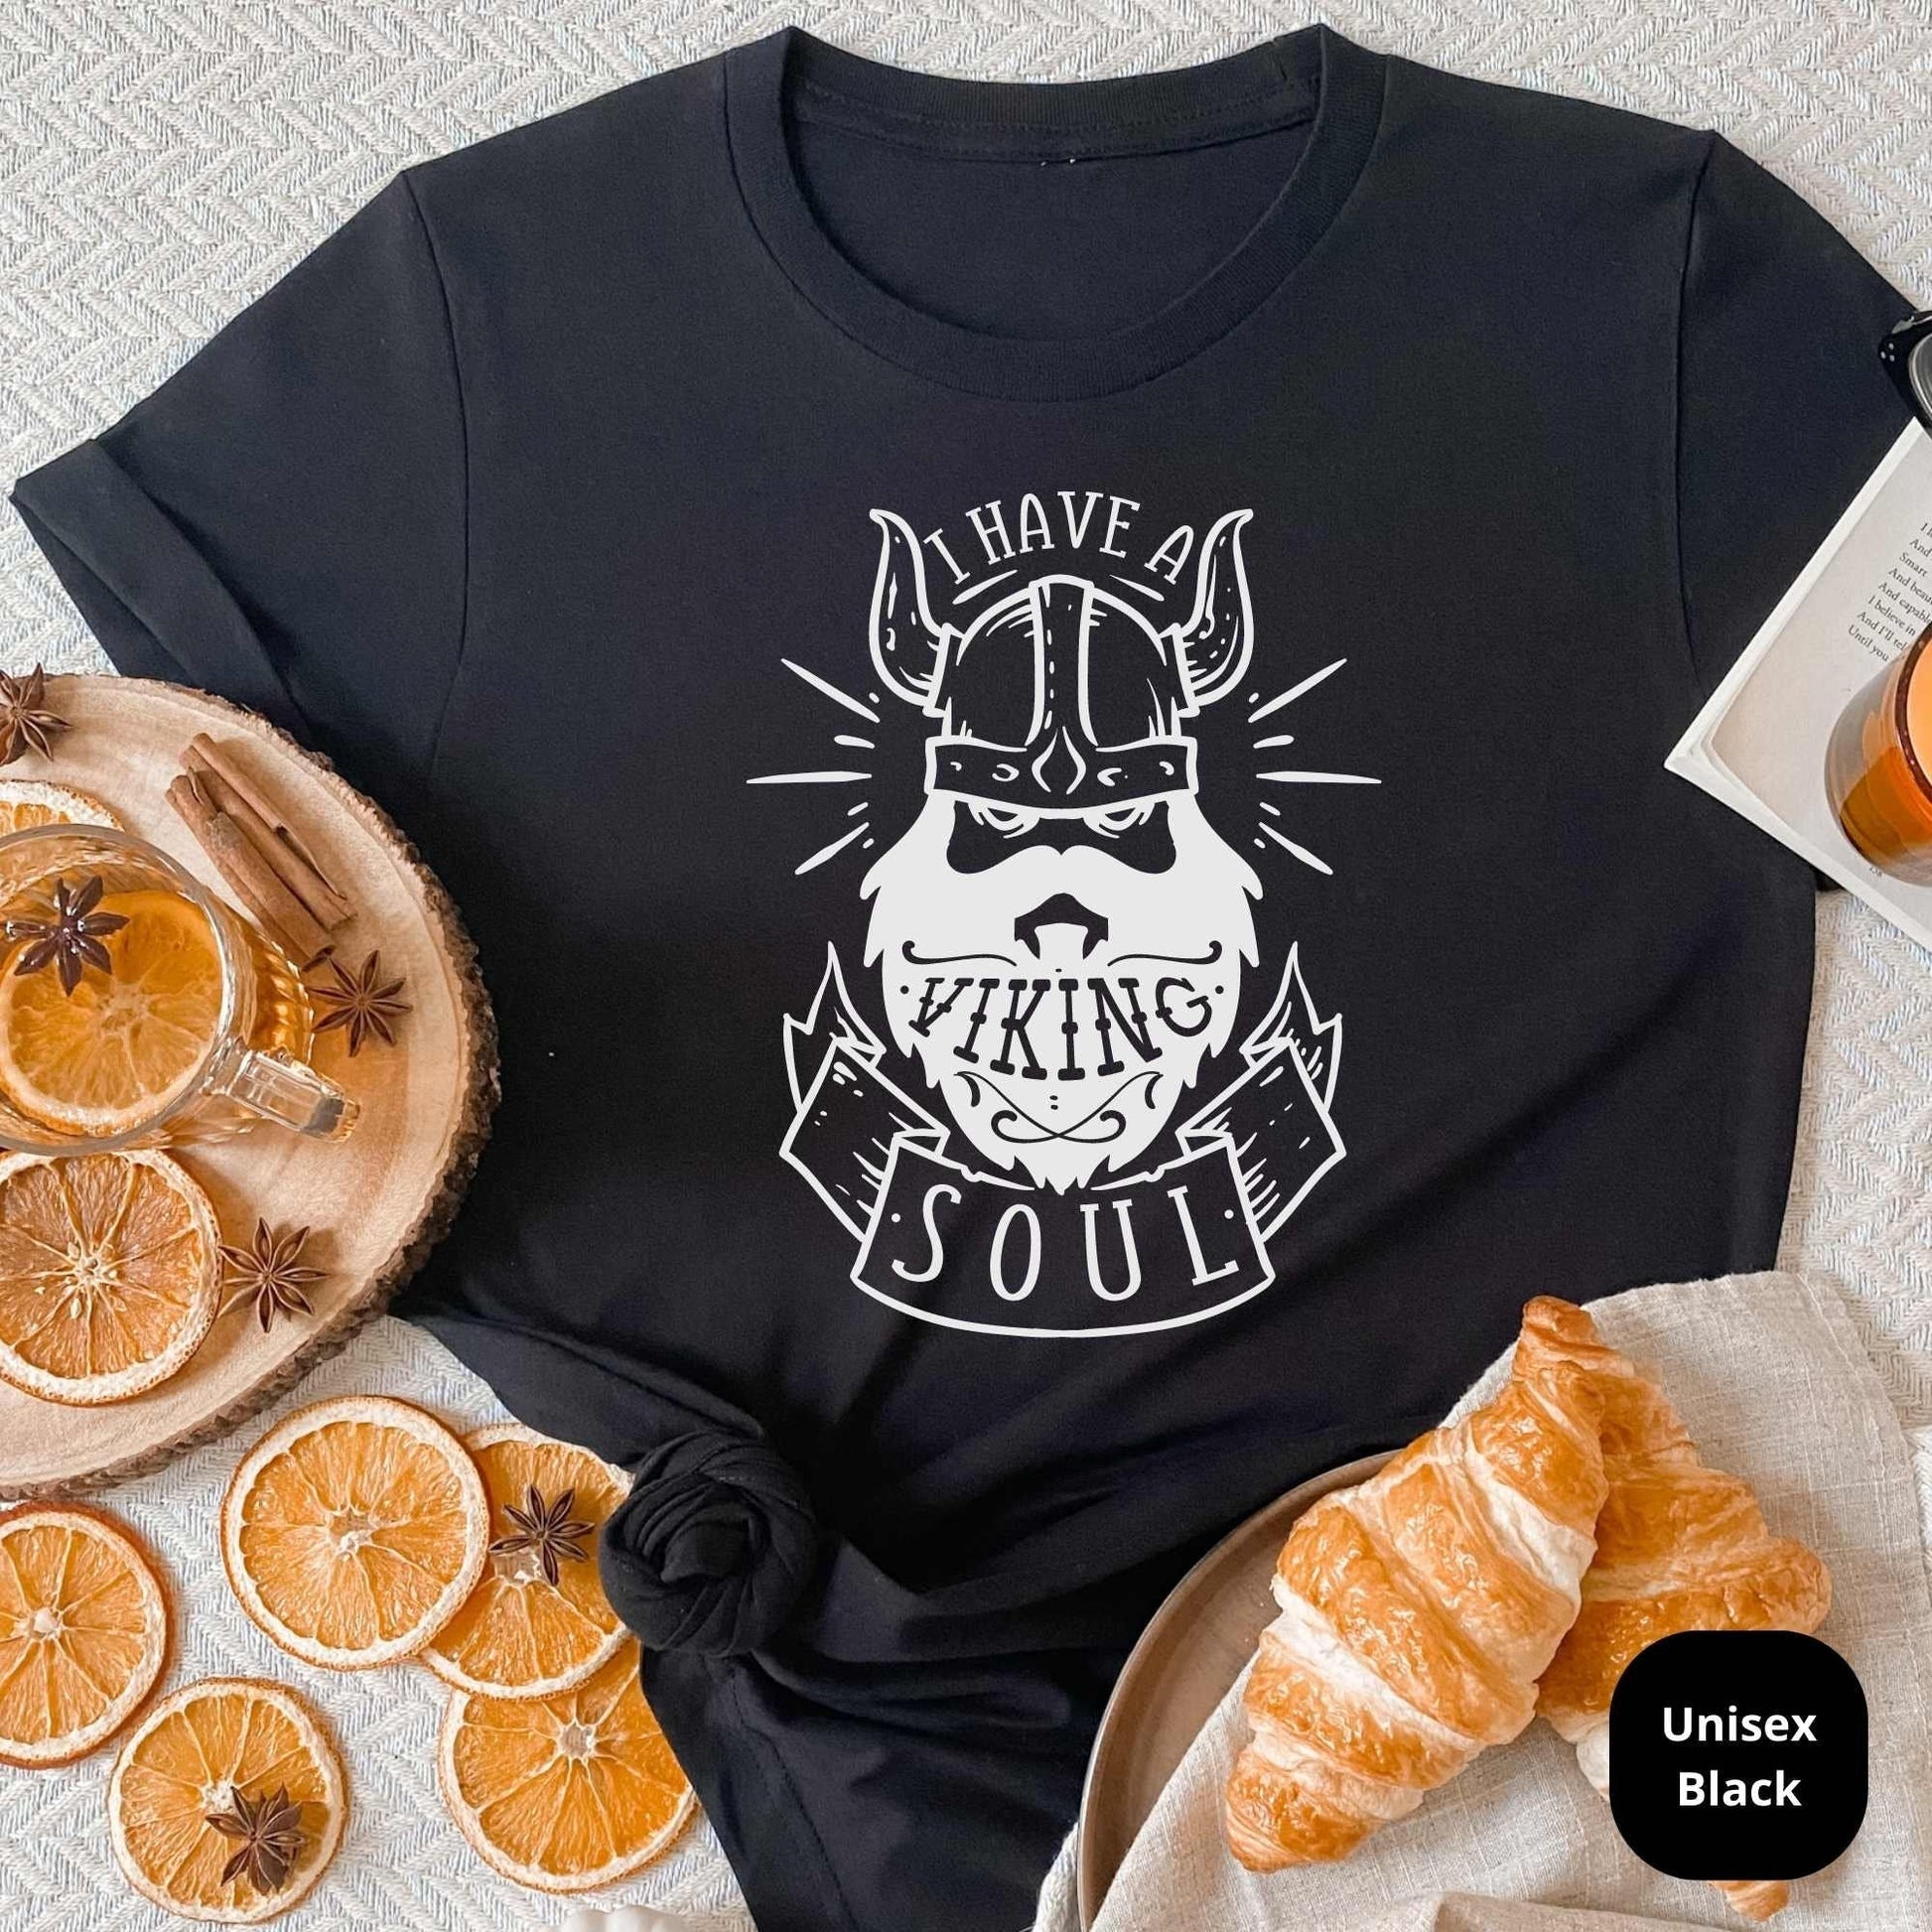 Beard Dad Shirt - Funny Big Beard Lover Shirt for New Dad  - Soon to Be Father Gift - Christmas Gift - Viking Soul - Birthday Gift for Dad HMDesignStudioUS